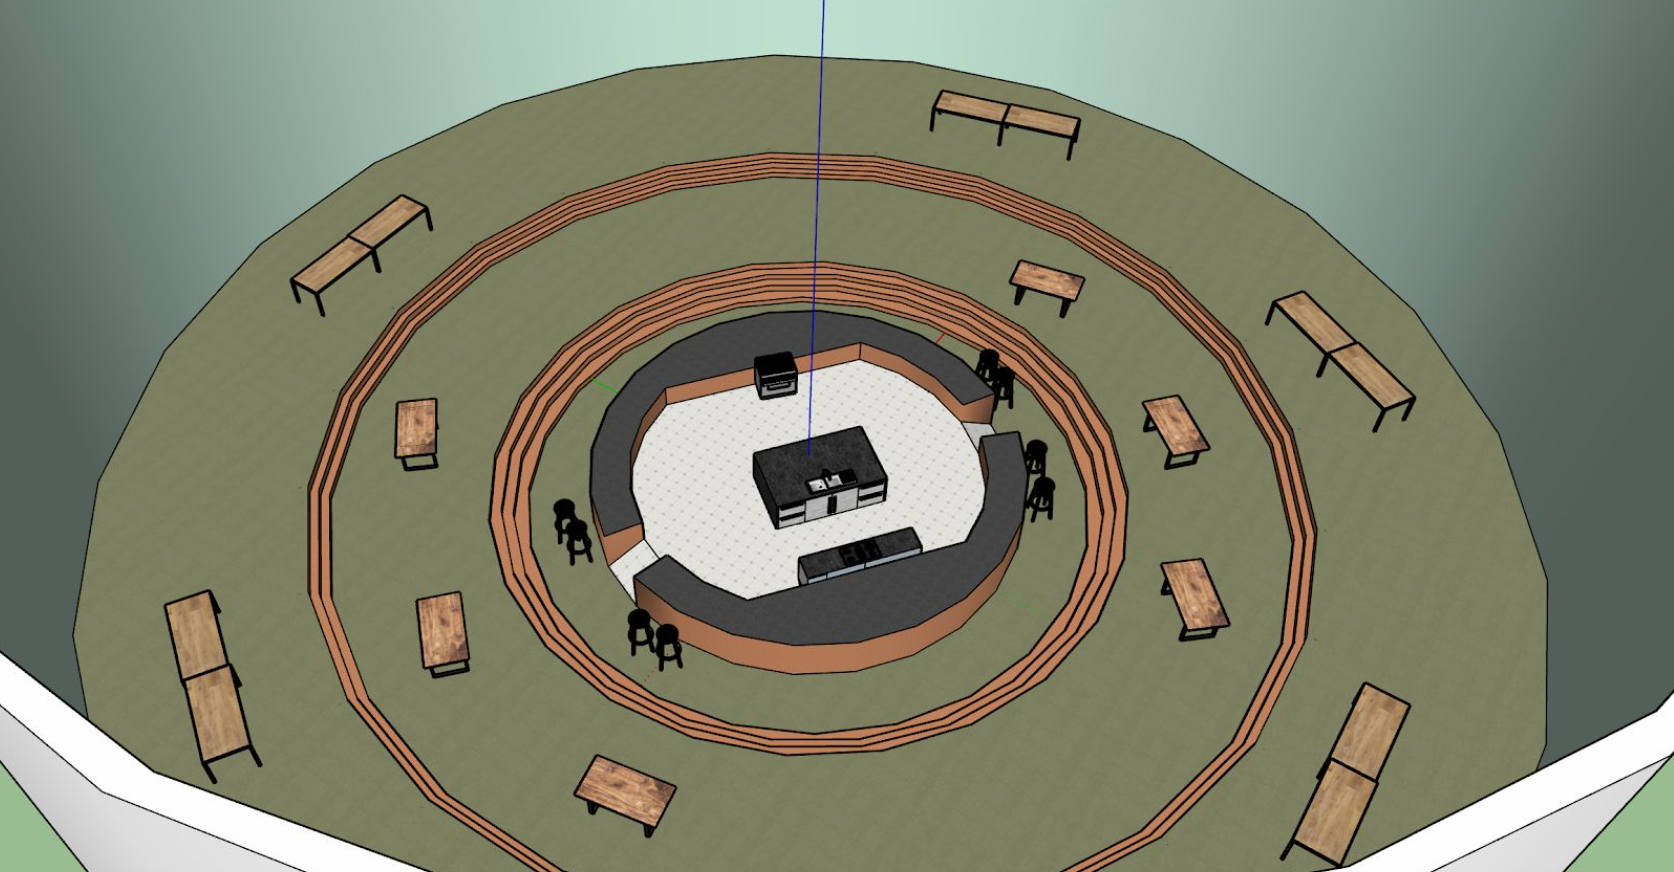 Layout of the restaurant rendered in 3D modeling software.